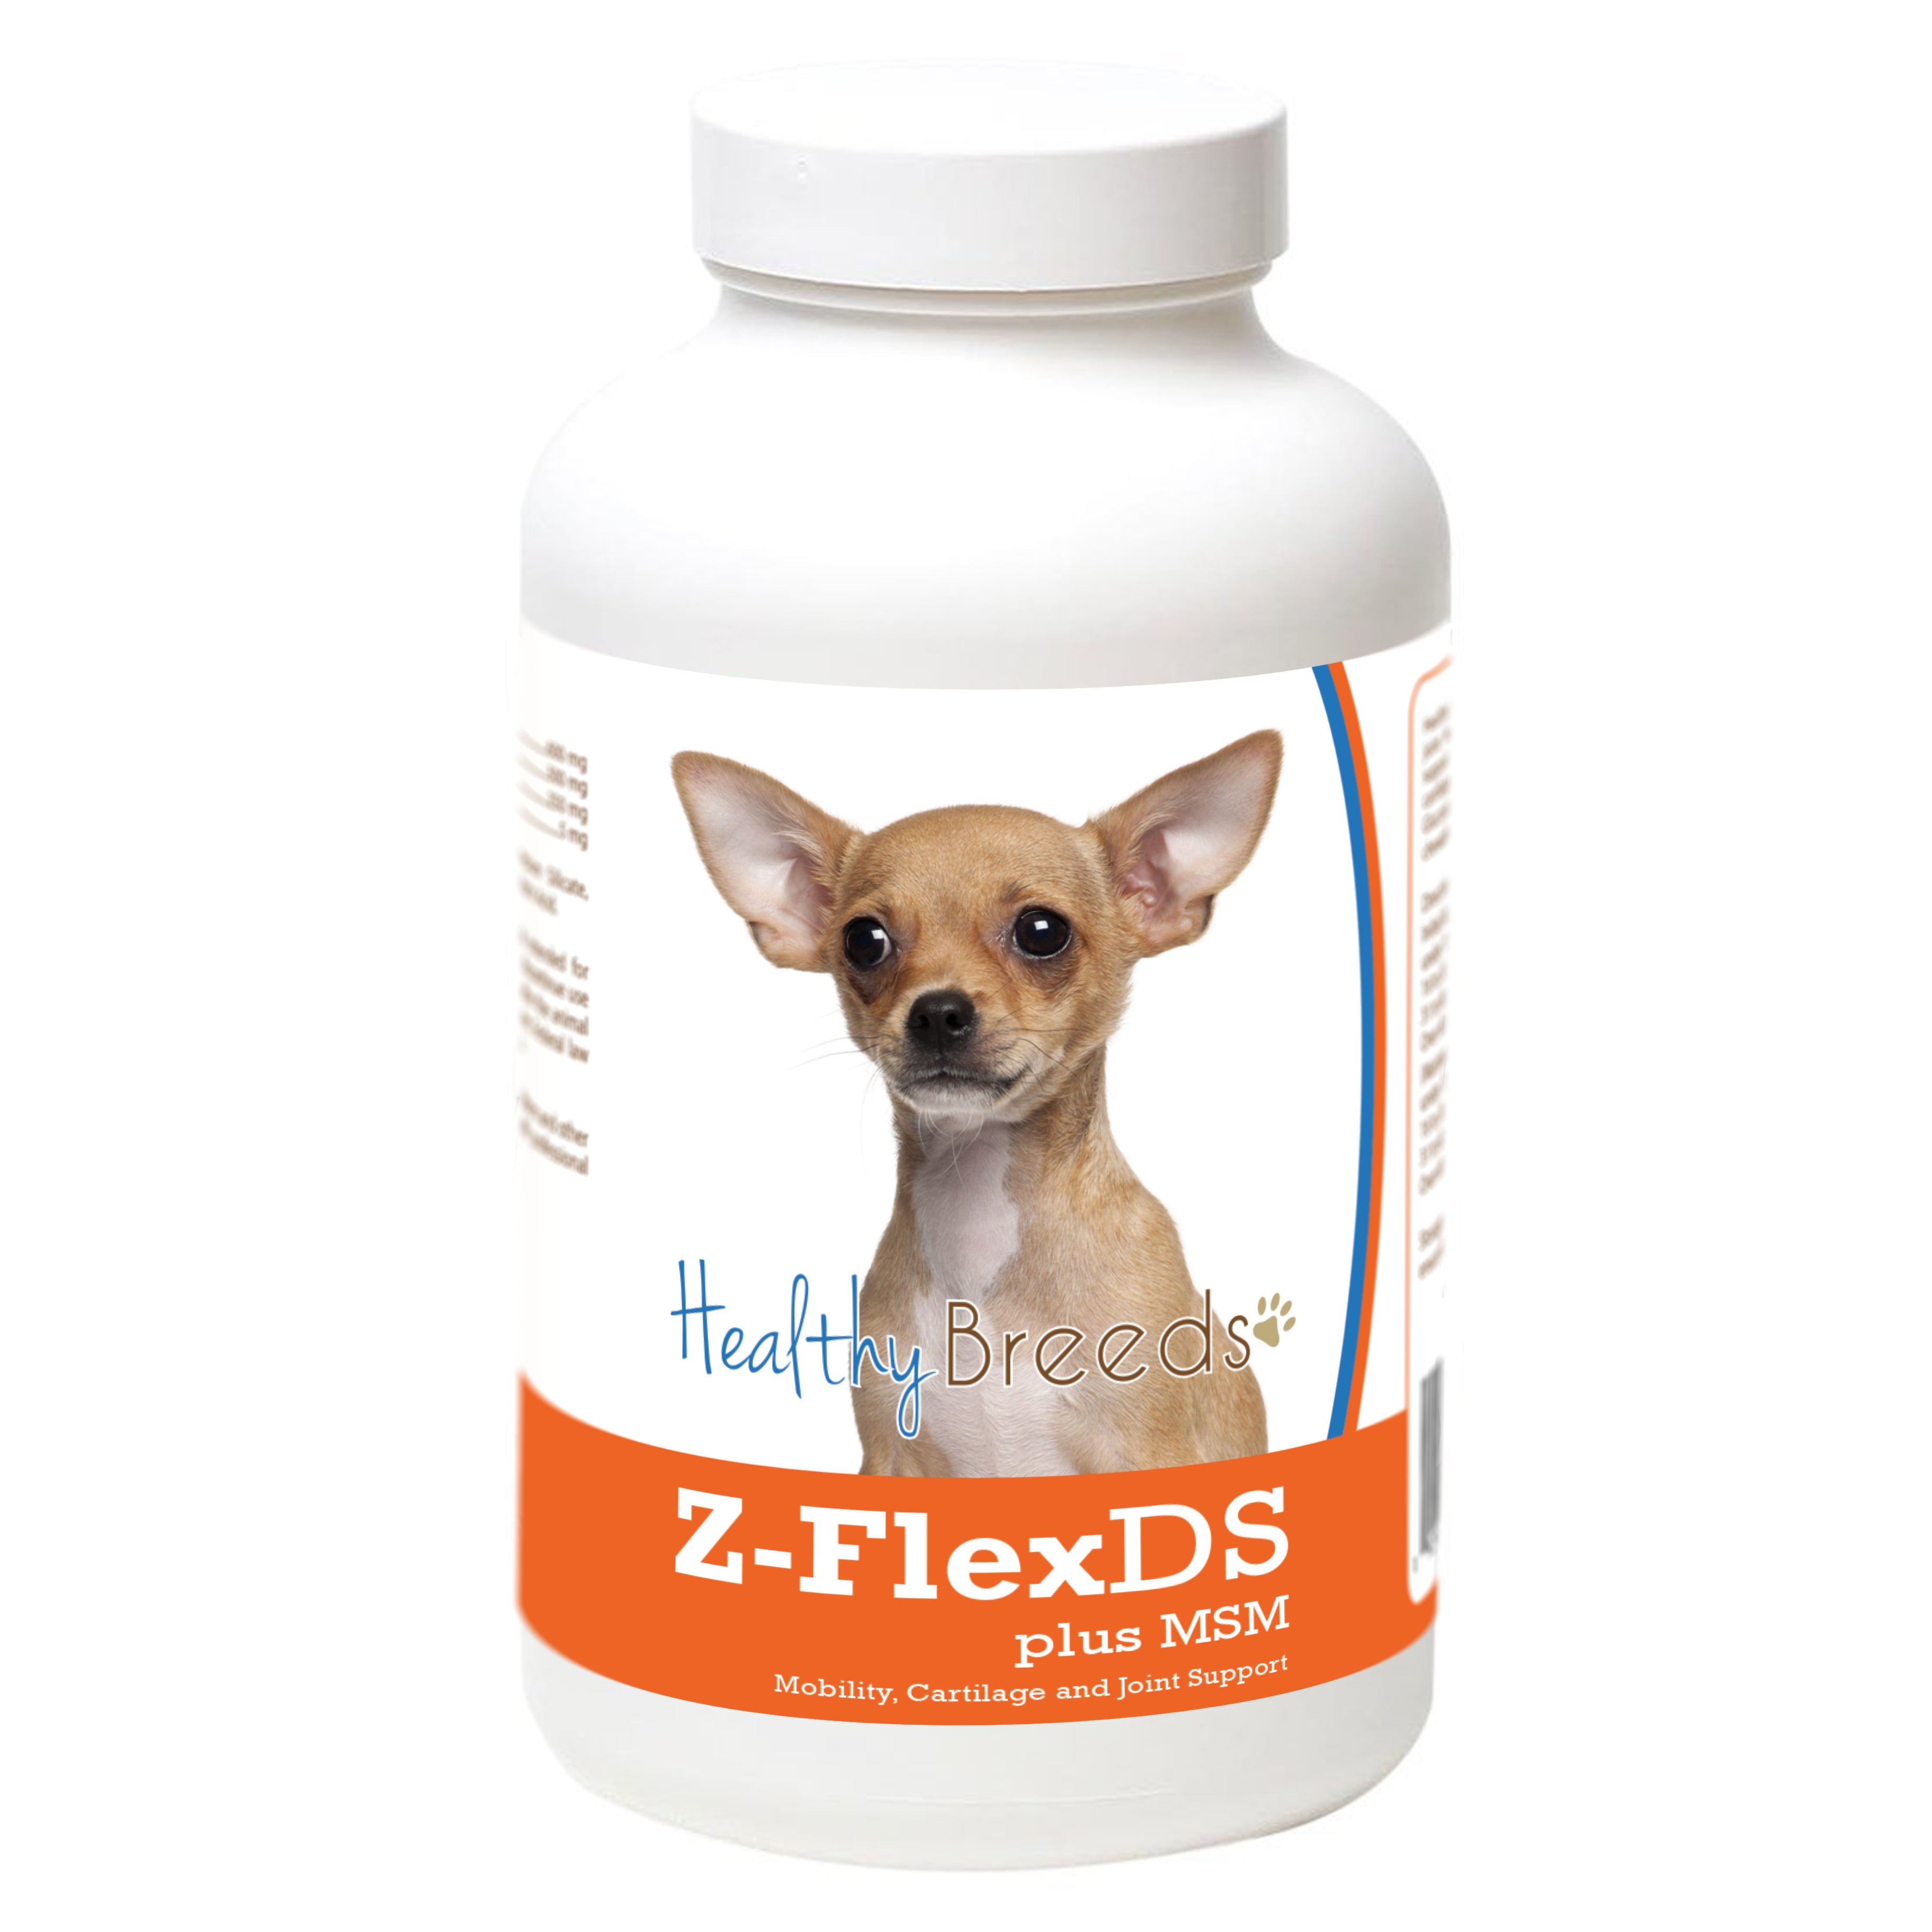 Chihuahua Z-FlexDS plus MSM Chewable Tablets 60 Count